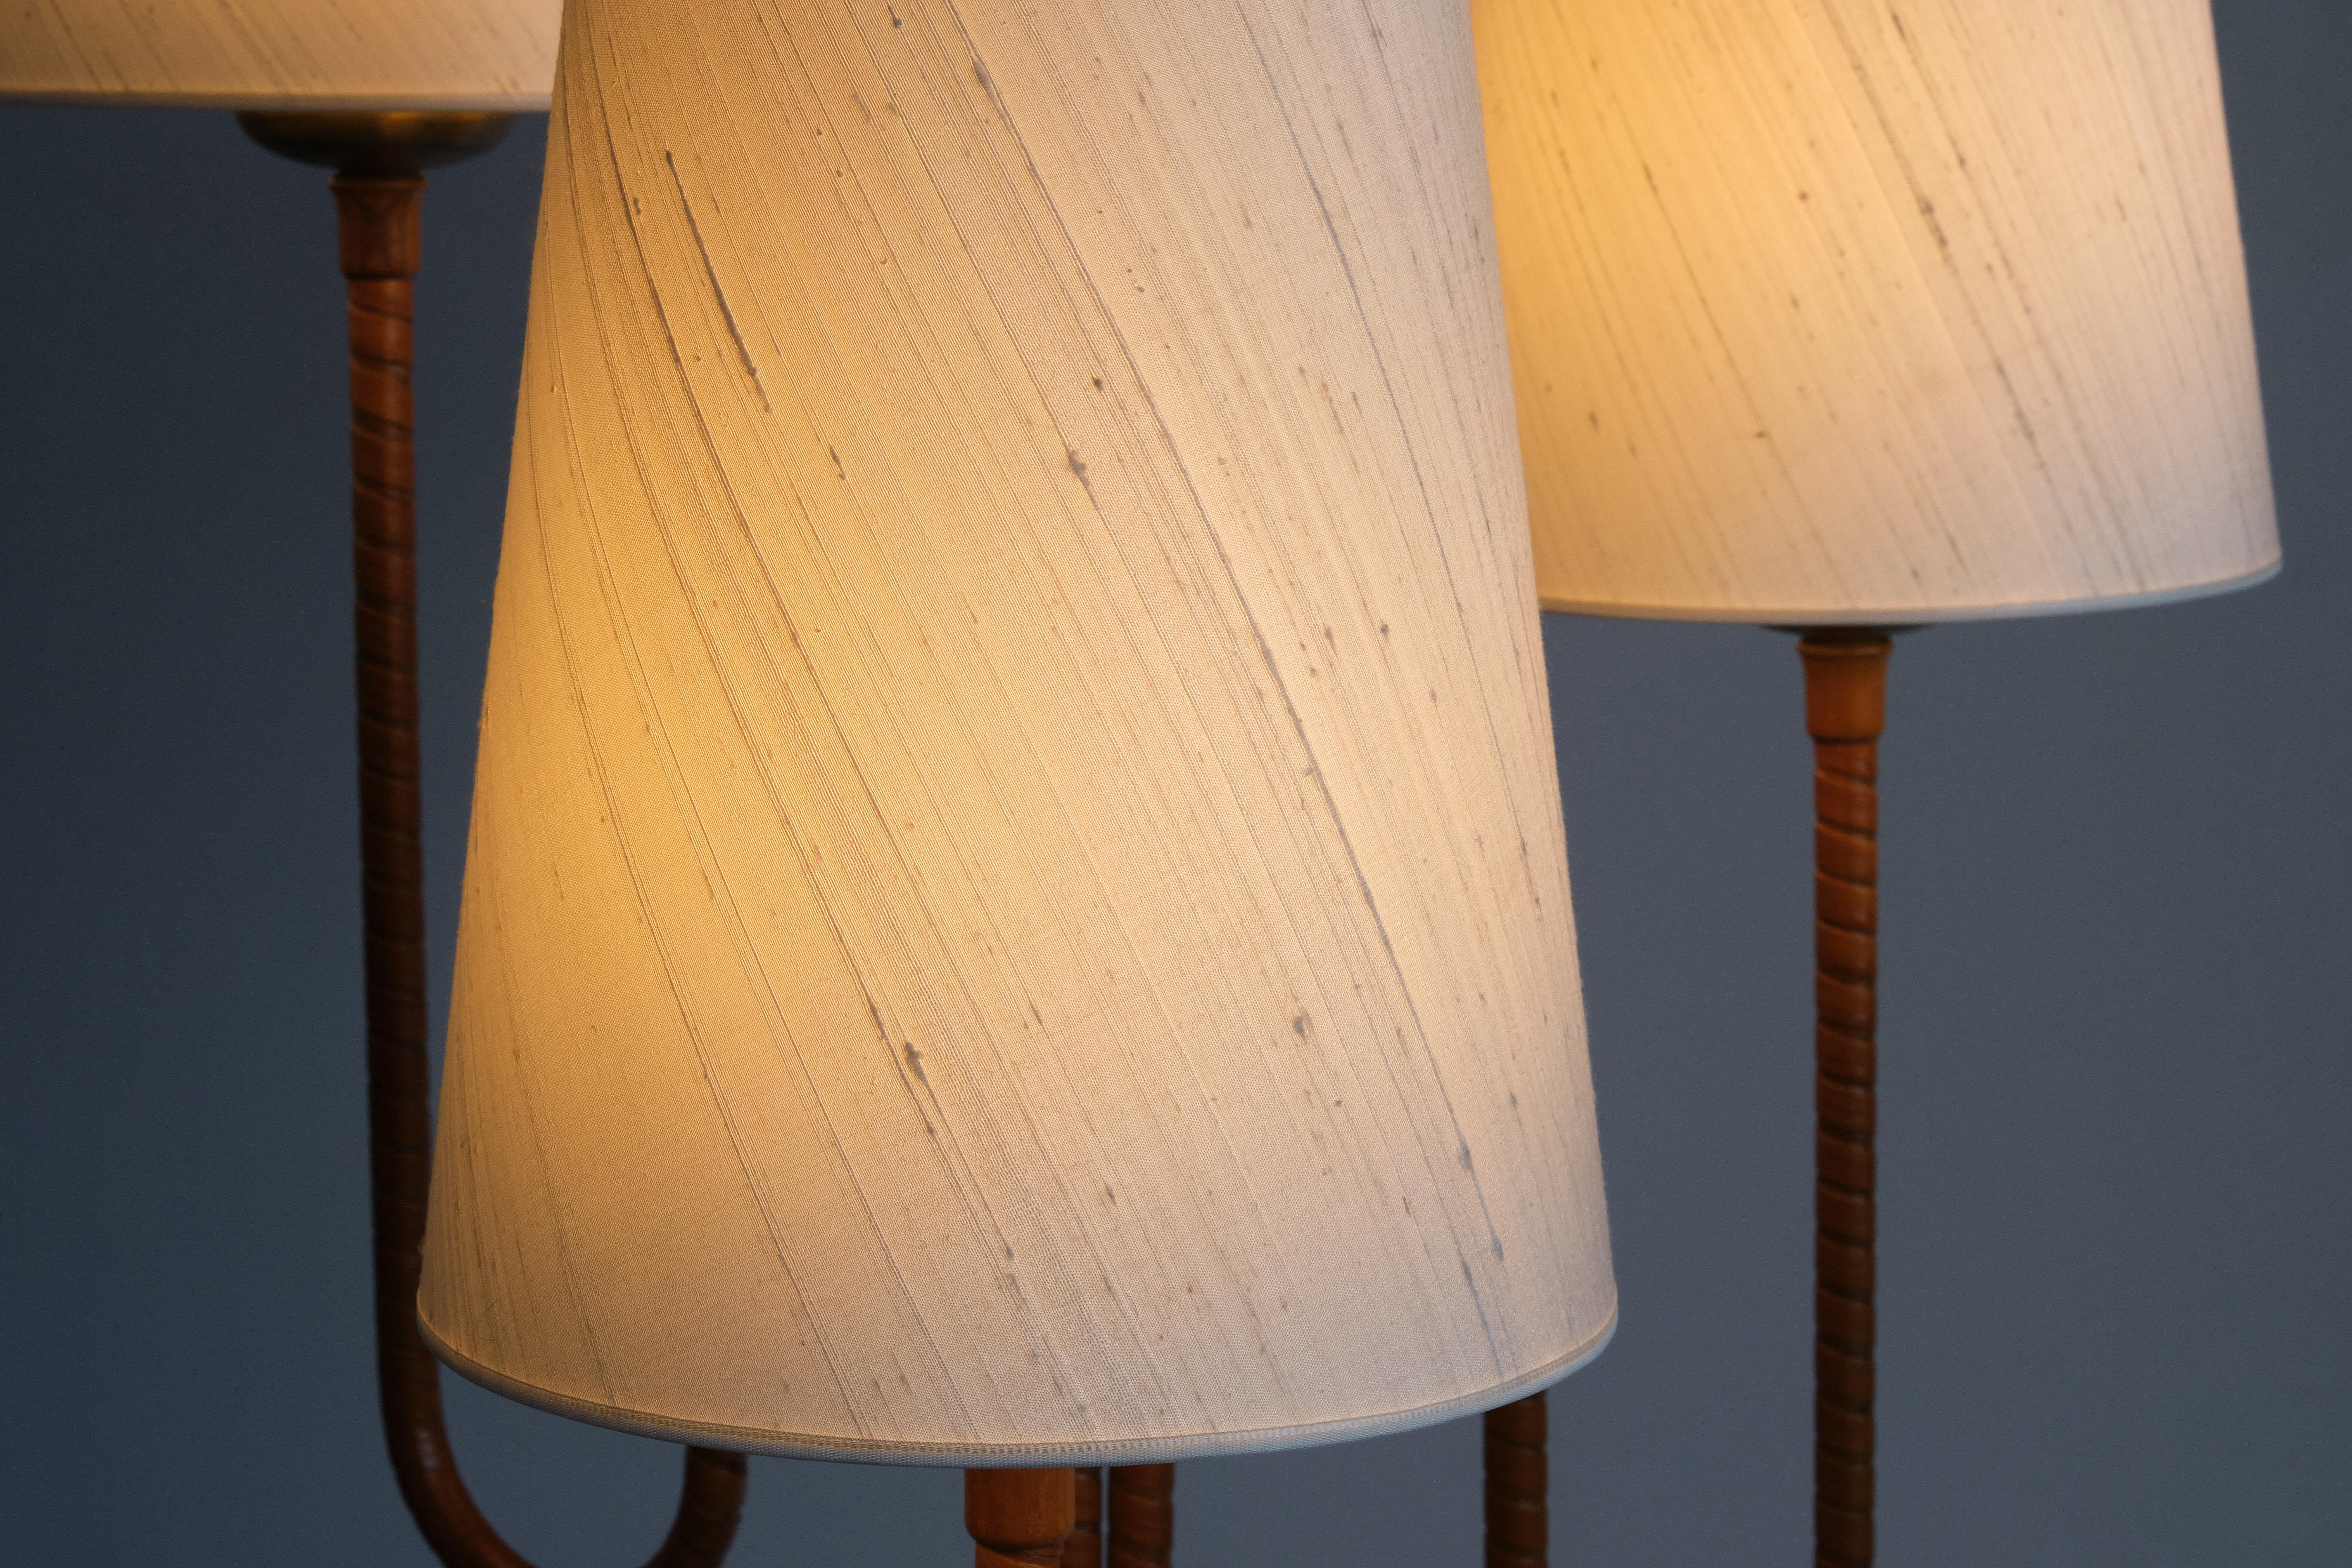 Sculptural Swedish Modern Three Arm Floor Lamp in Elm and Silk,  1930s For Sale 4